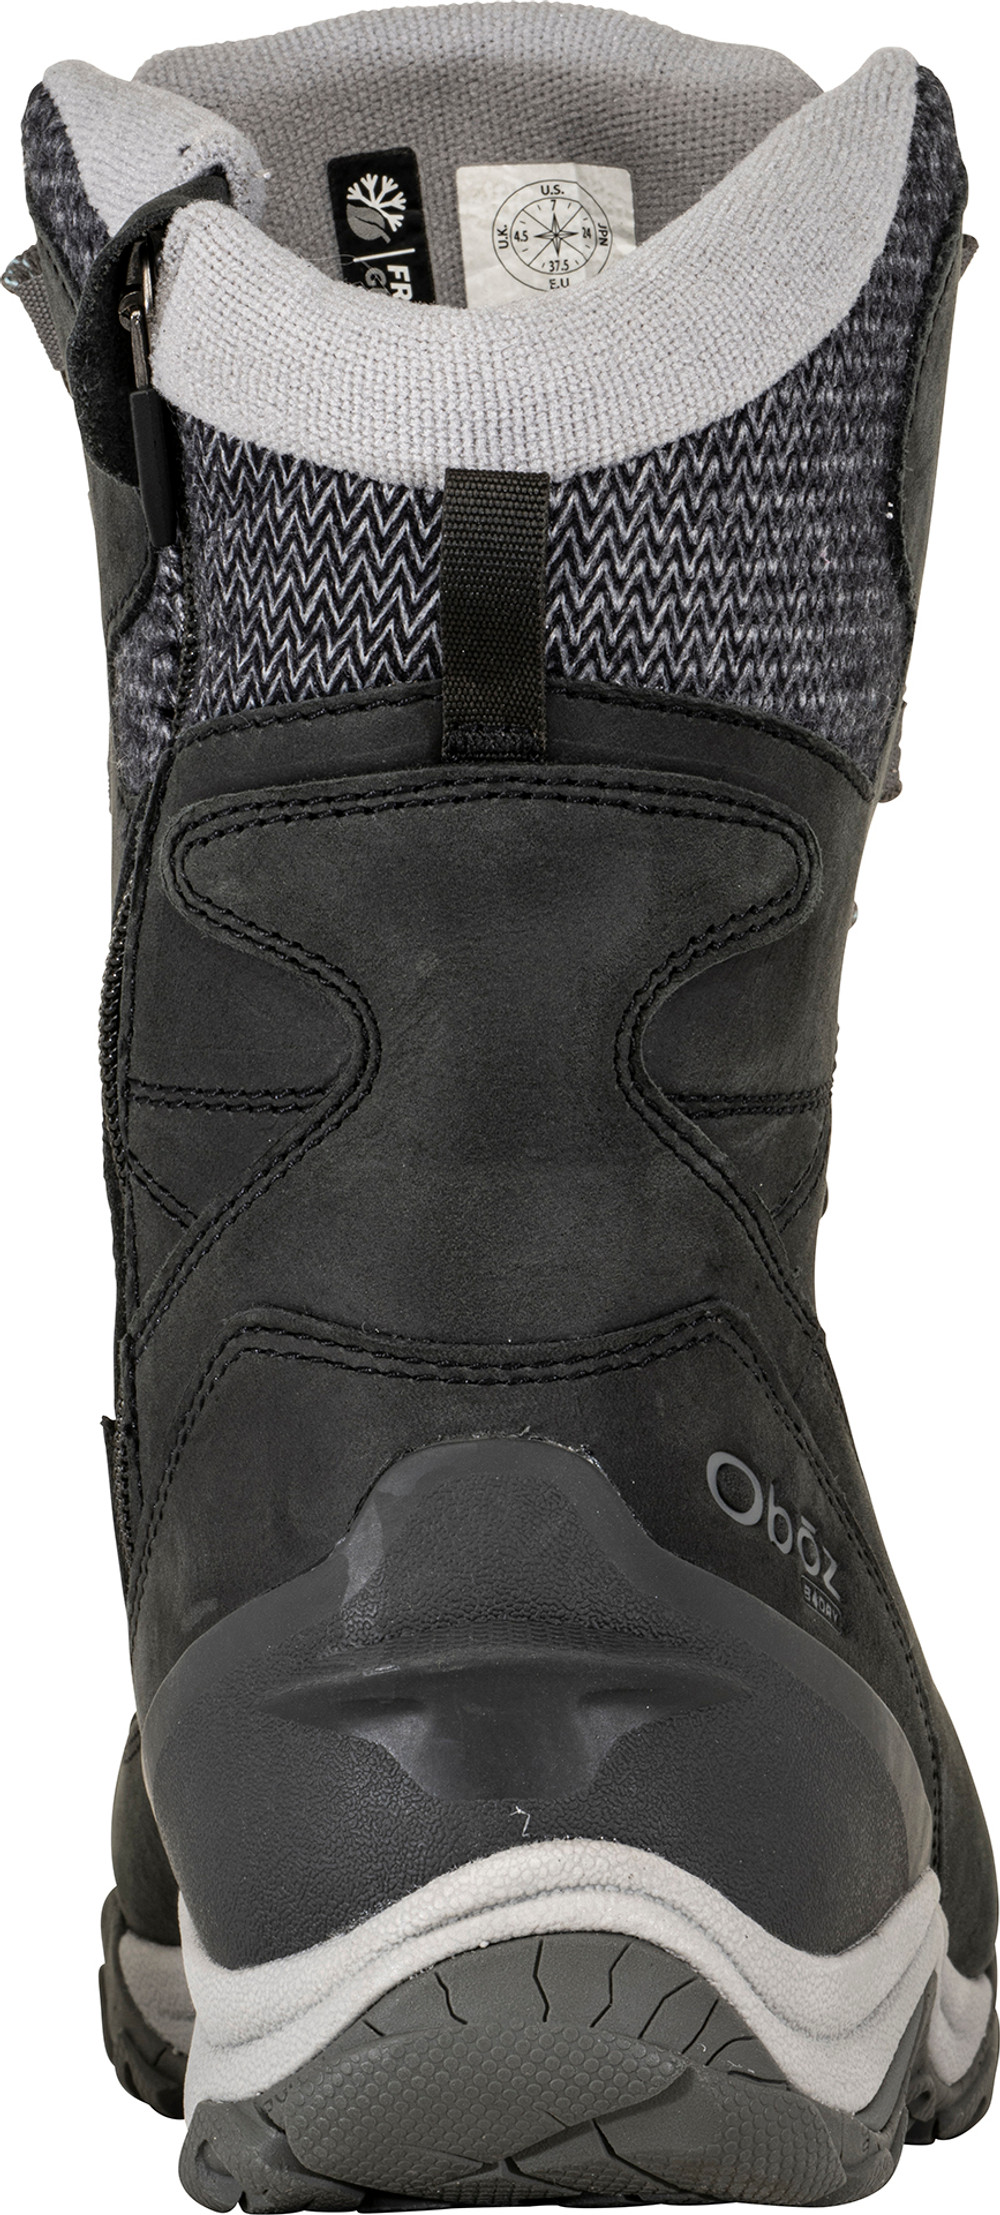 Oboz Women's Ousel Mid Insulated Waterproof Winter Boot